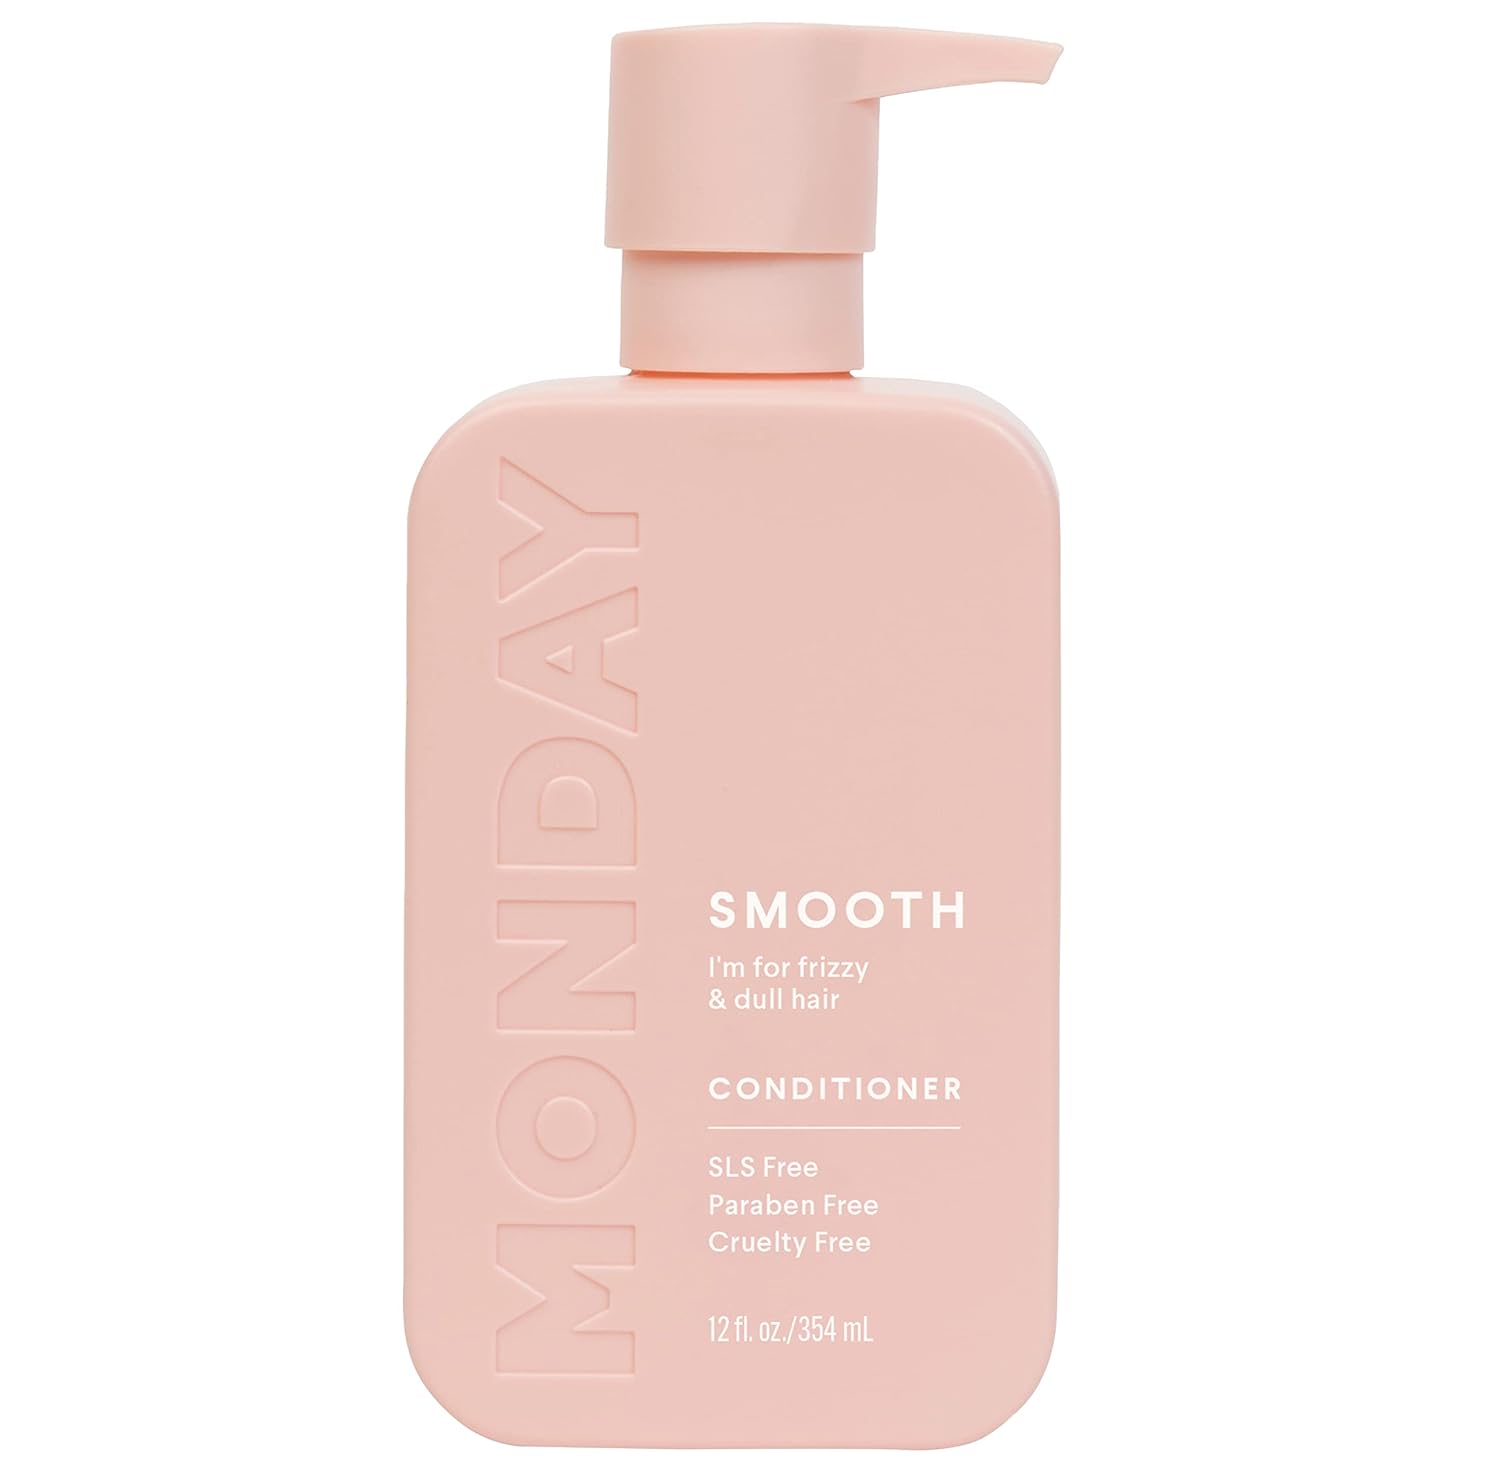 Monday Haircare Smooth Conditioner (Amazon Exclusive) 30Oz For Frizzy, Coarse, And Curly Hair, Made From Coconut Oil, Shea Butter,  Vitamin E, 100% Recyclable Bottles (887Ml)